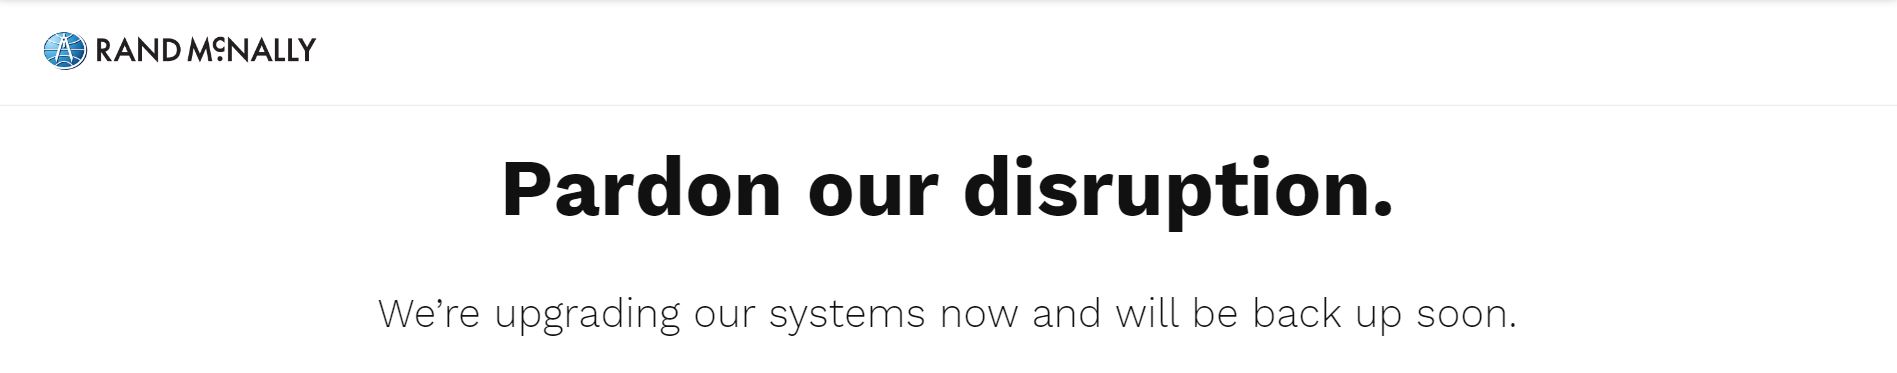 Notice on Rand McNally site says they are upgrading systems.